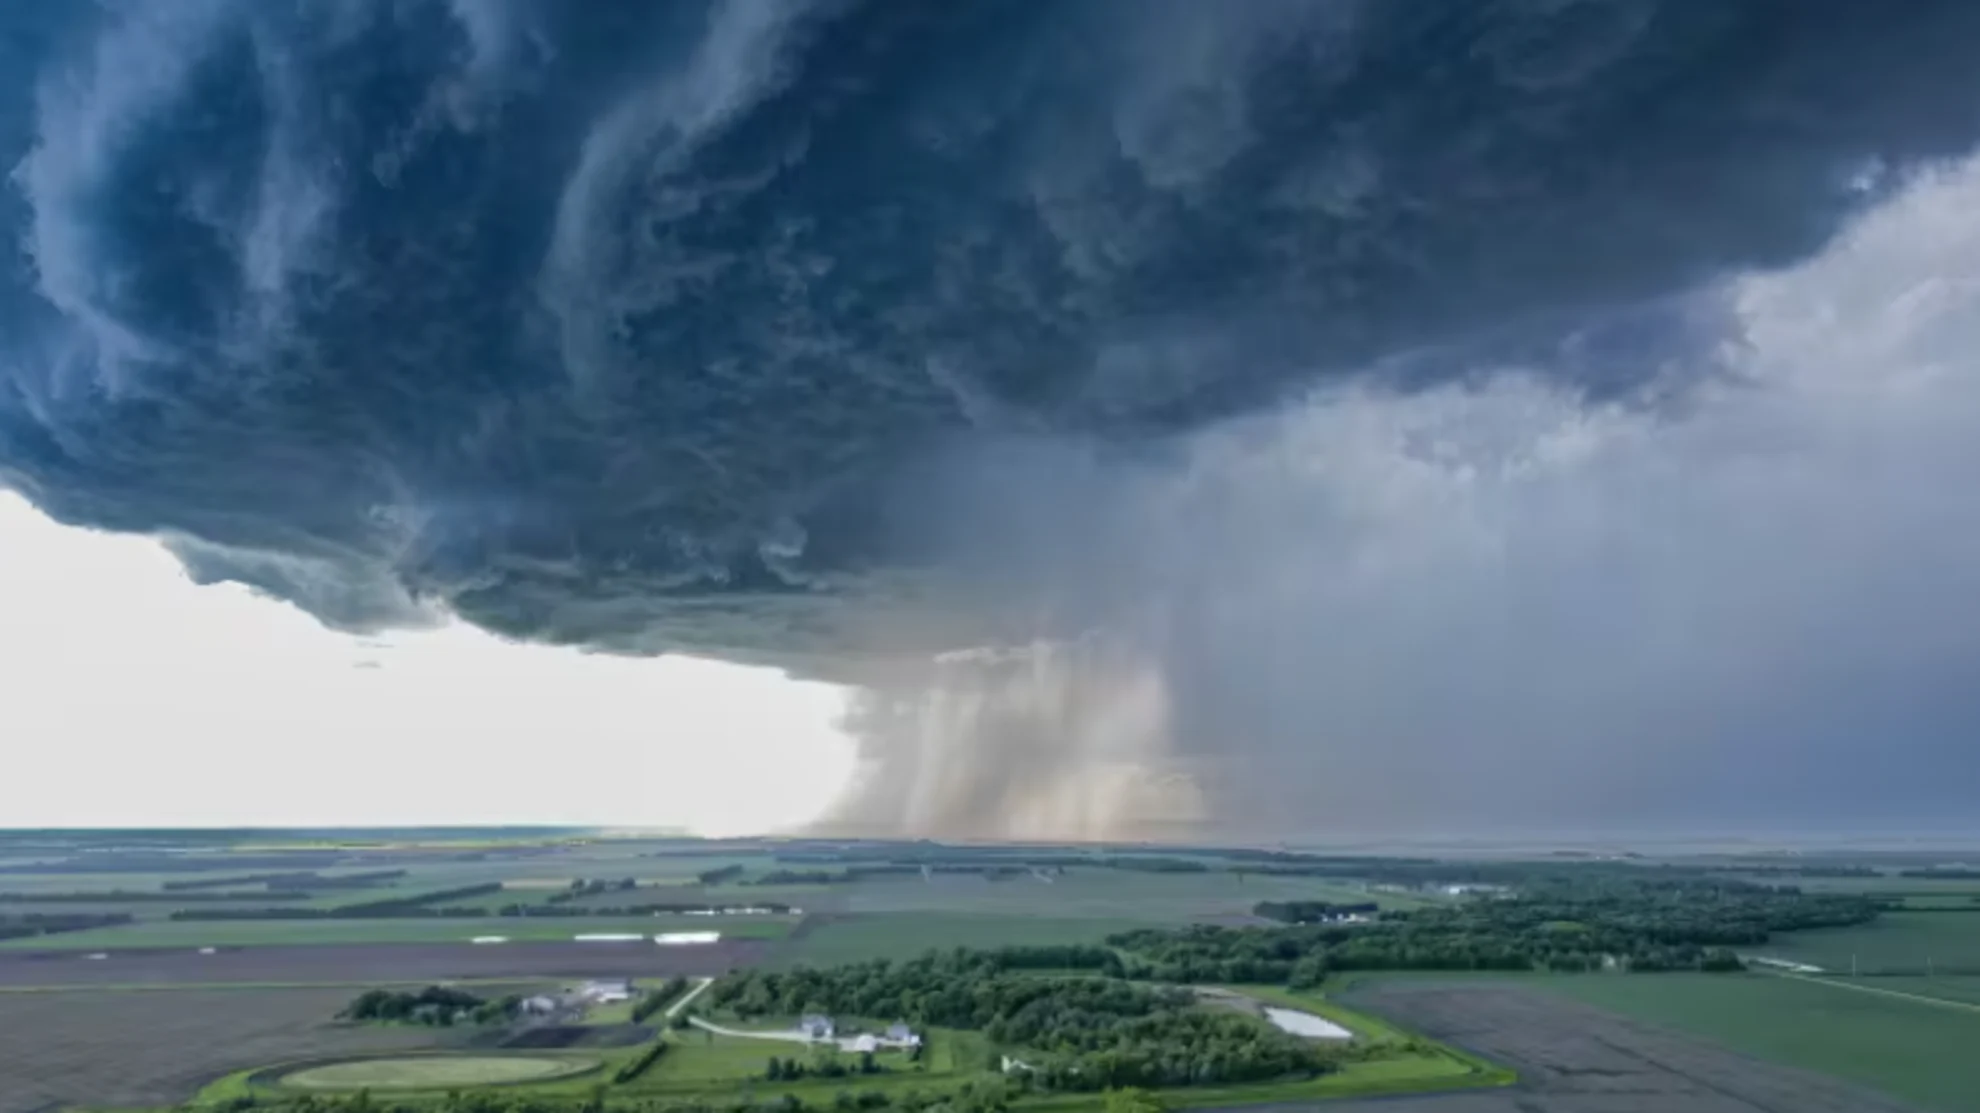 Multiple tornadoes touch down in Manitoba storm Wednesday. See it, here